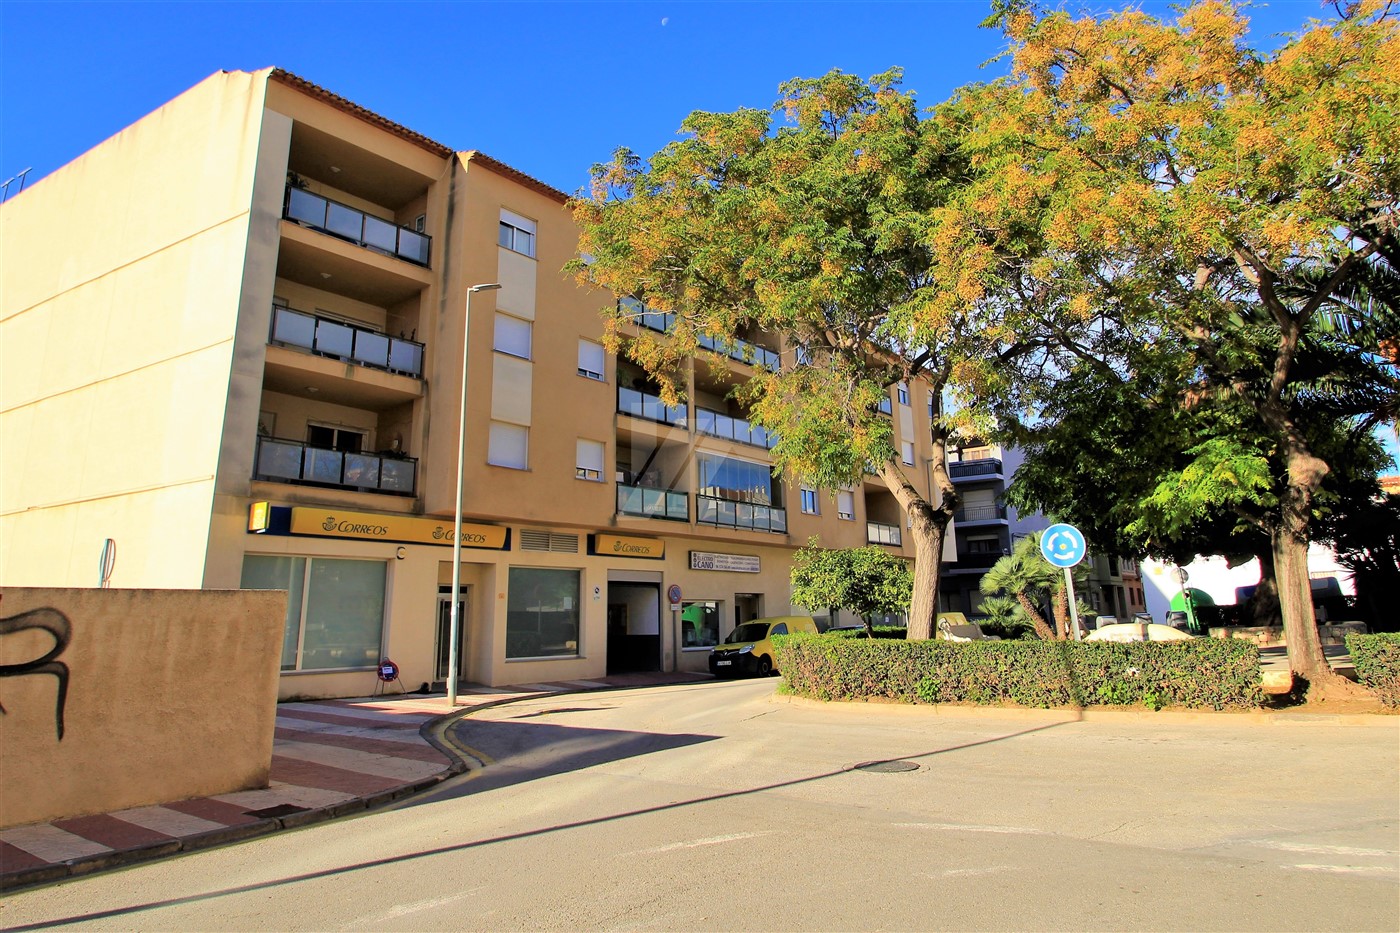 Flat for sale in the centre of Teulada, Costa Blanca